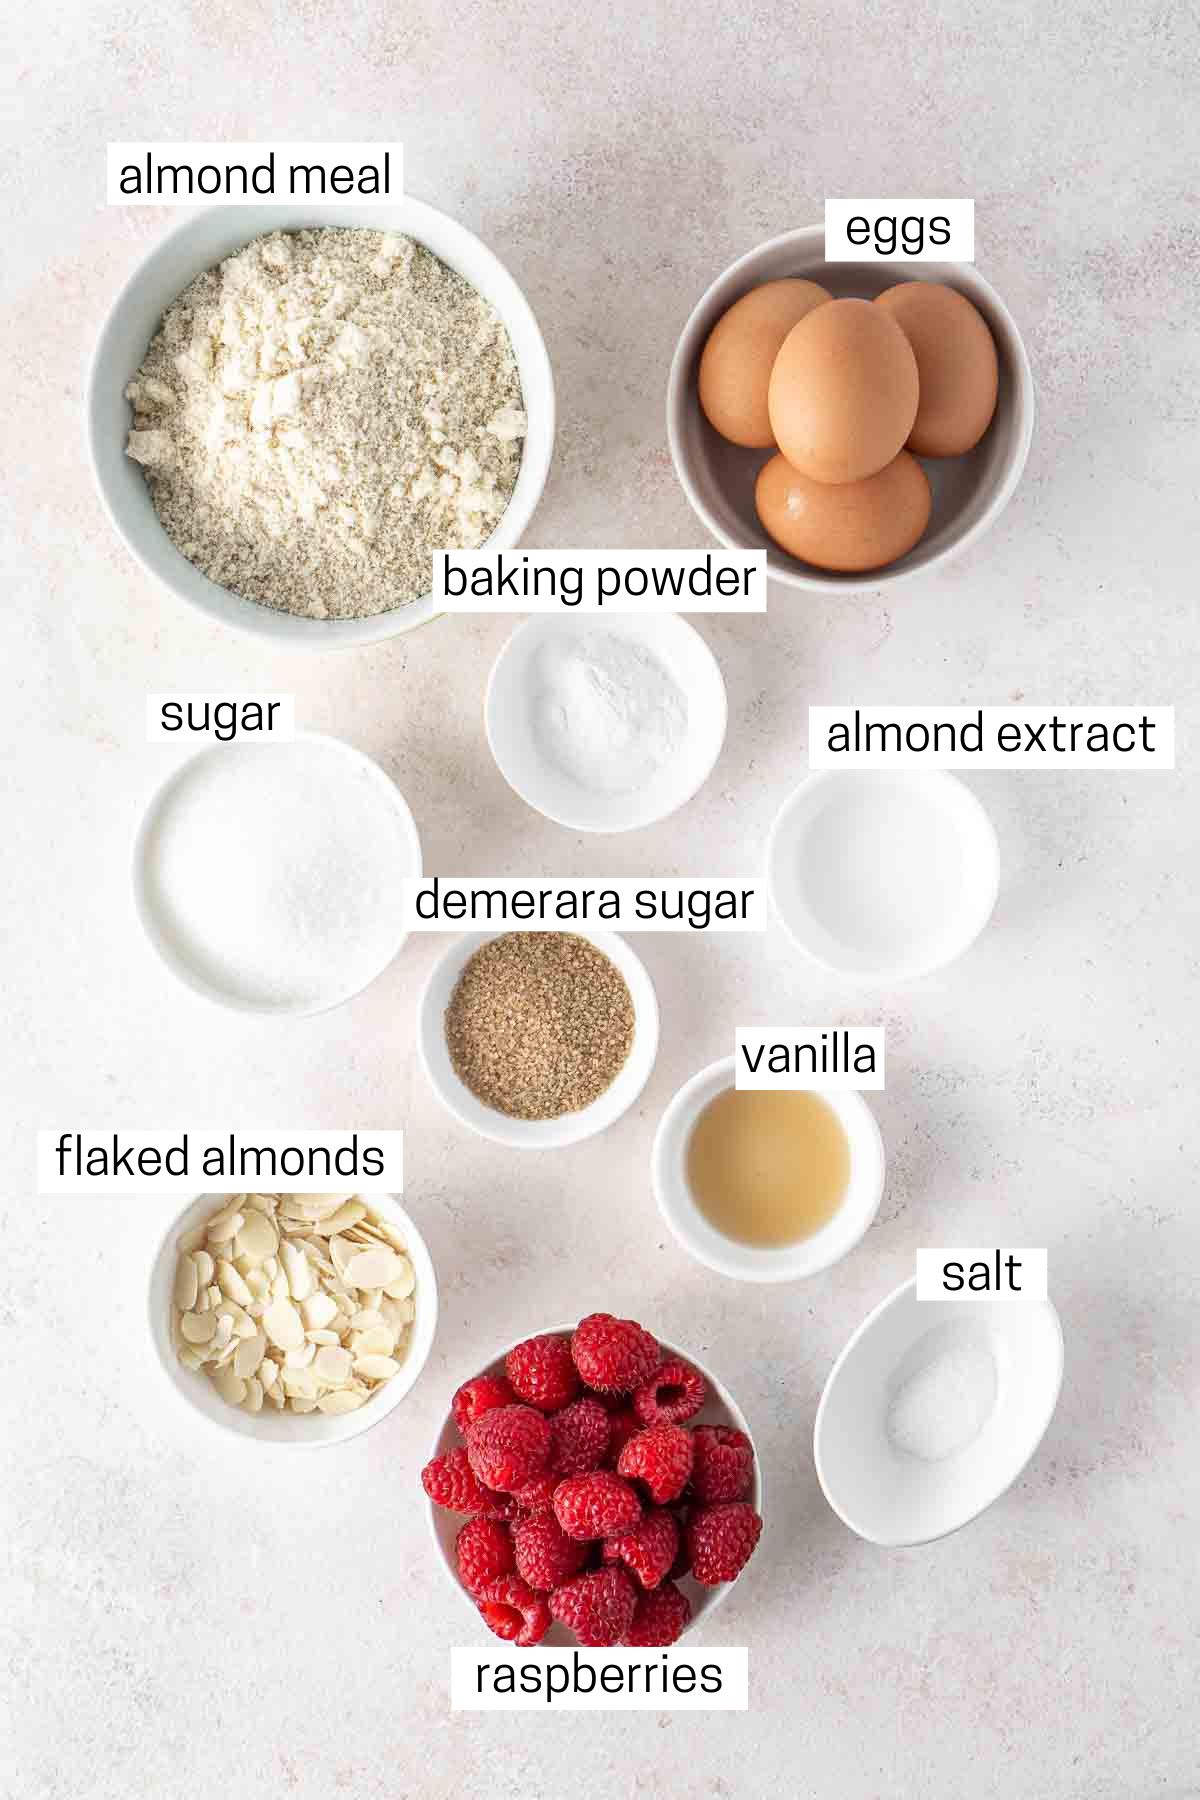 All ingredients to make gluten and dairy free almond and raspberry cake laid out in small bowls.